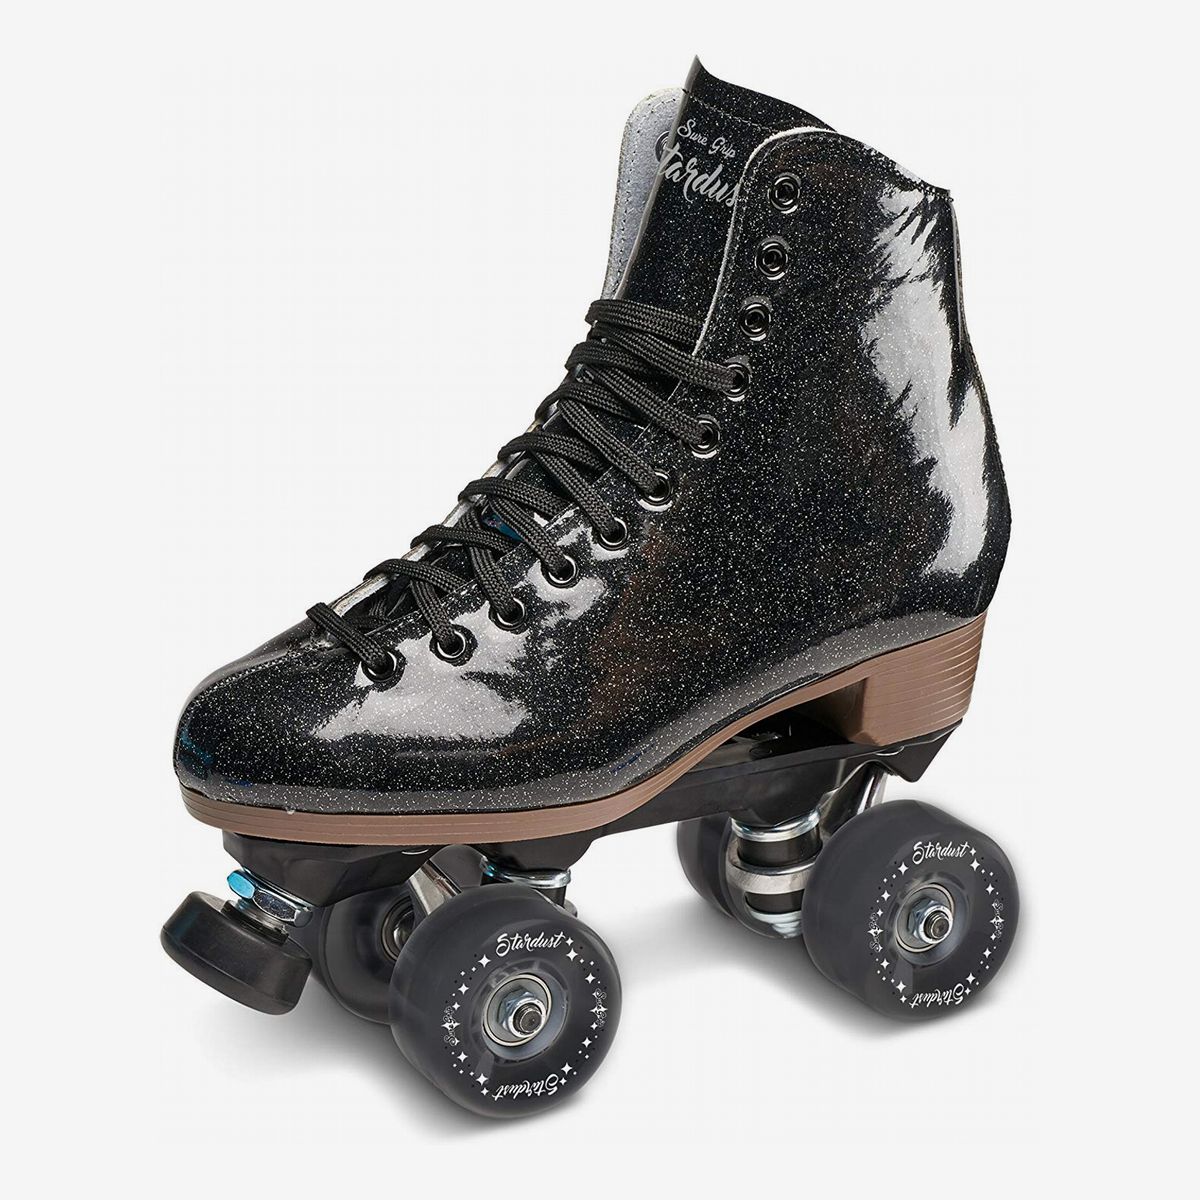 Roller Skates for Women Men Indoor Outdoor Roller Skates for Beginner a Shoes Bag High Top PU Leather Classic Double-Row Roller Skates 